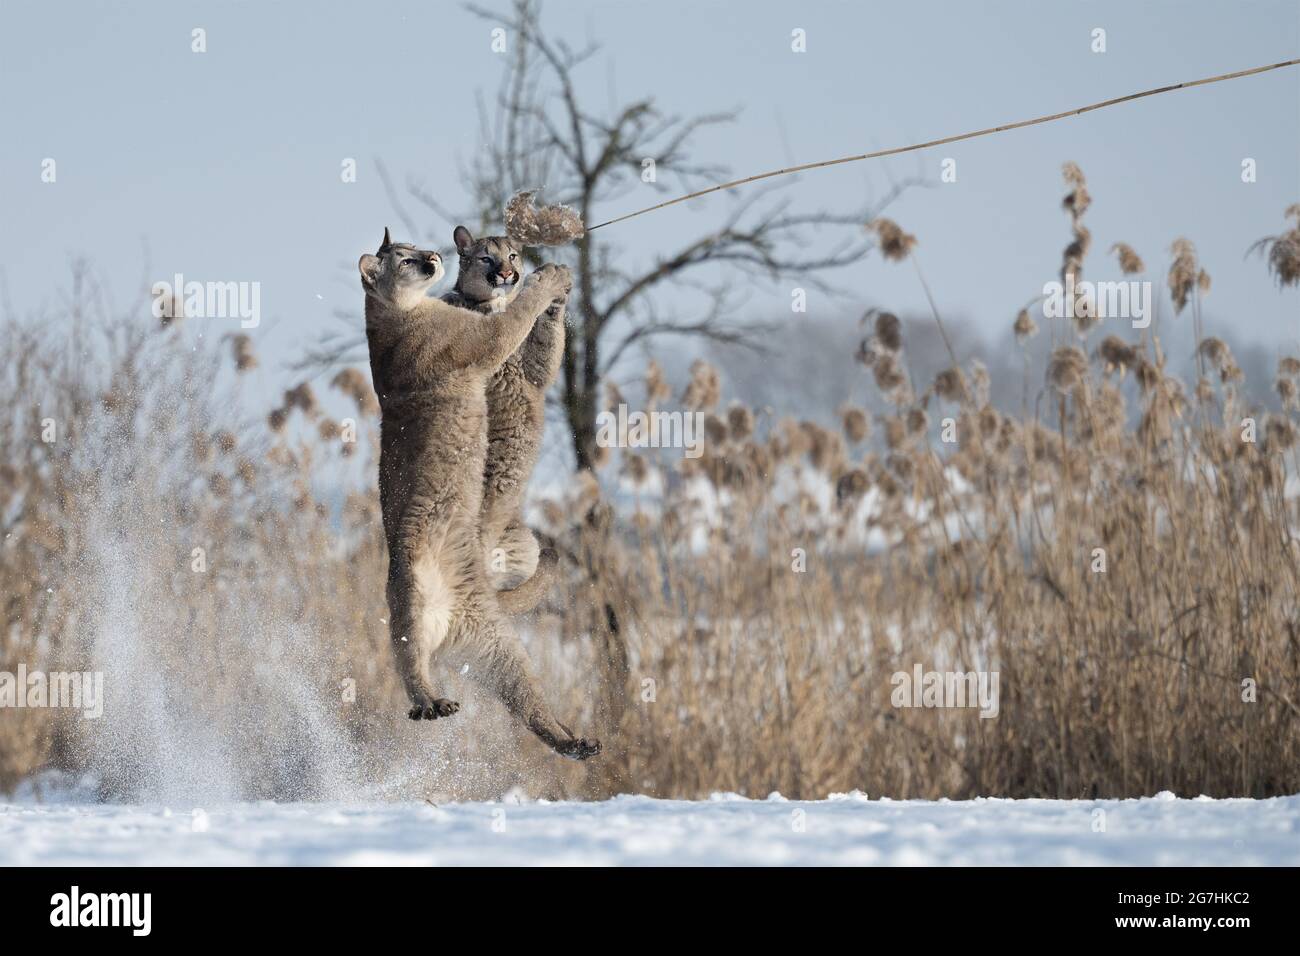 The cougars are playing in a snowy meadow. Stock Photo